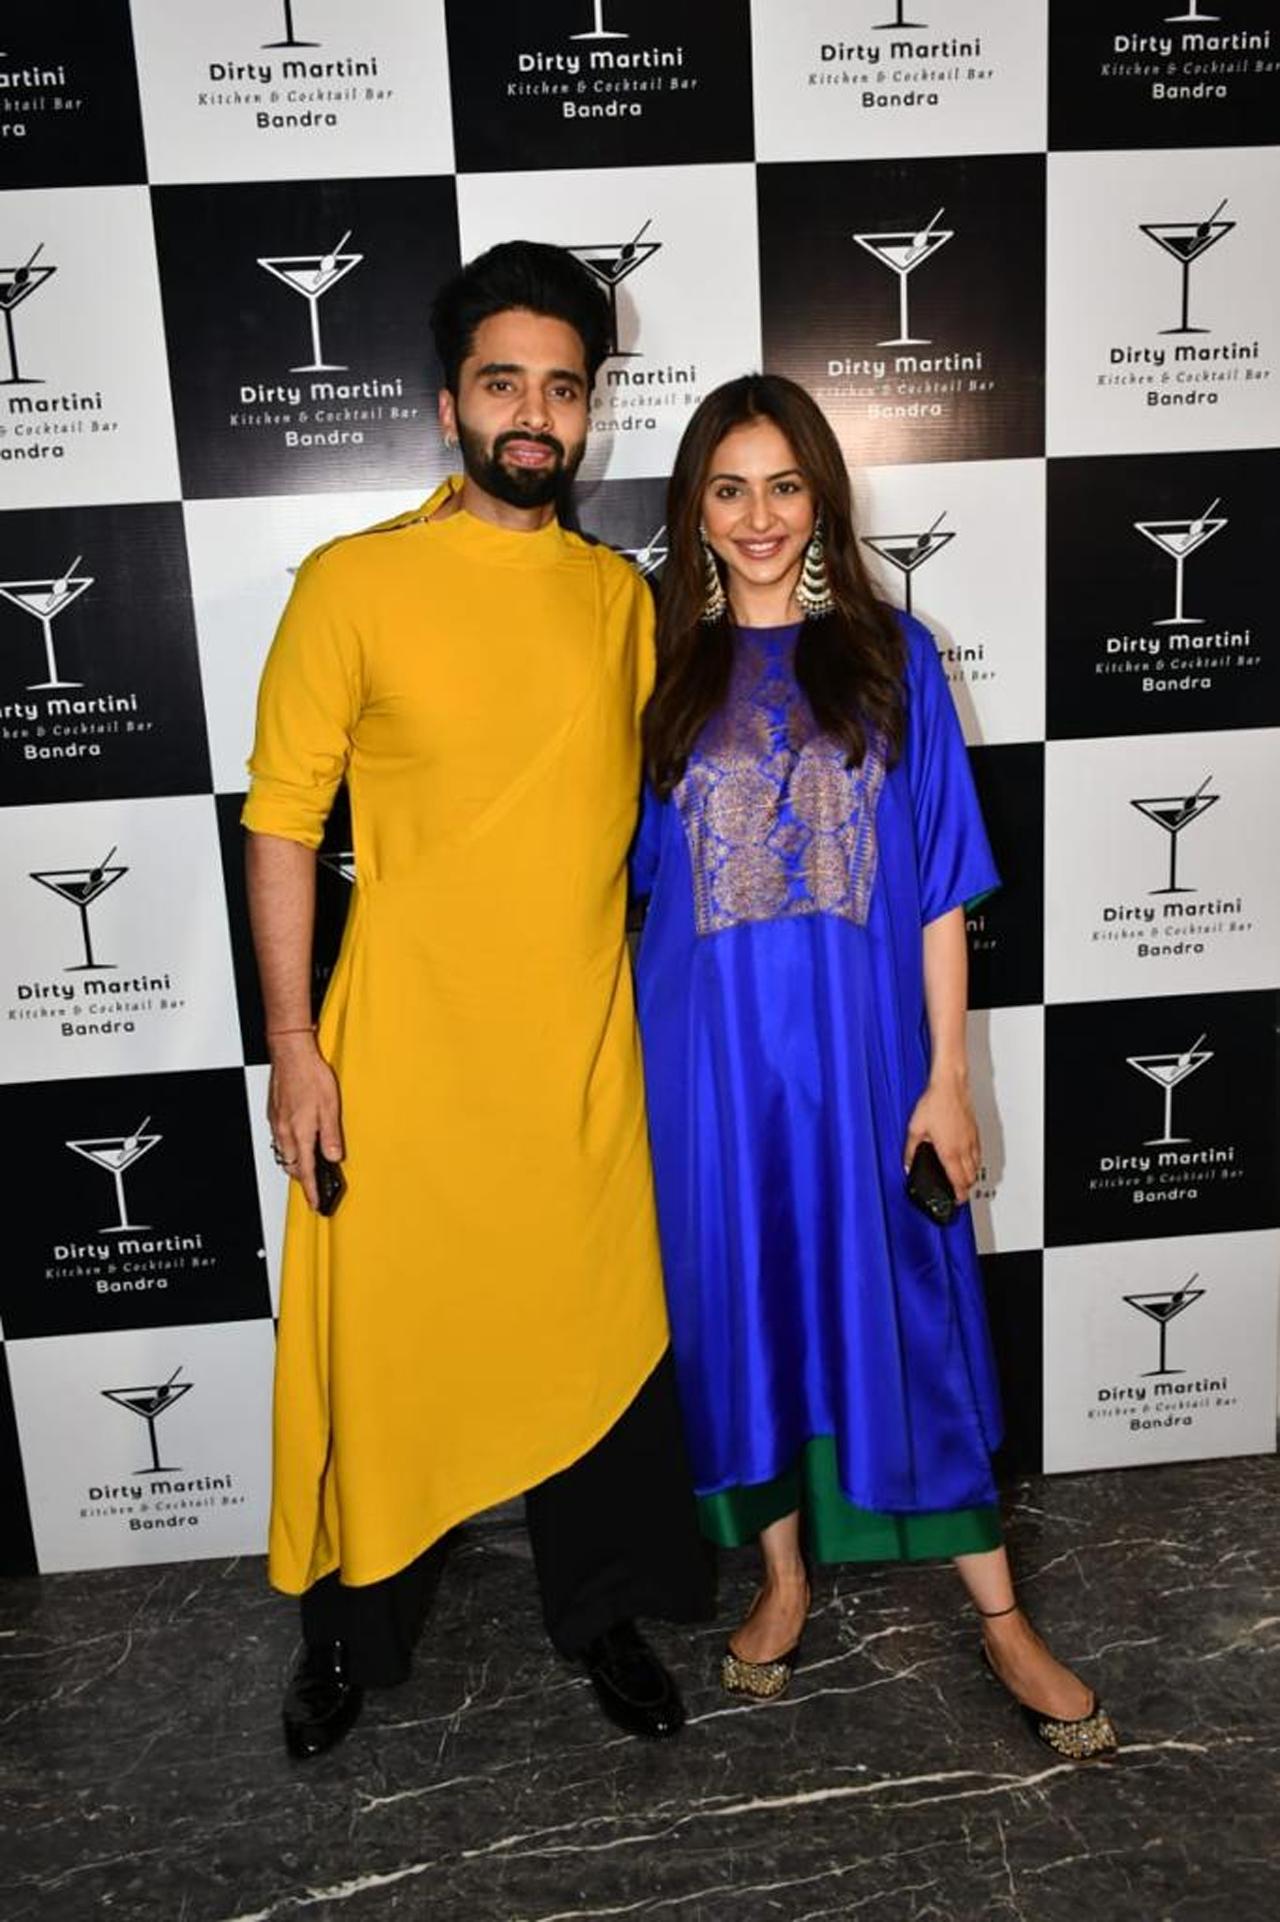 Couple Jackky Bhagnani, Rakul Preet Singh donned yellow and blue for the evening. Speaking about her relationship, she recently said, 